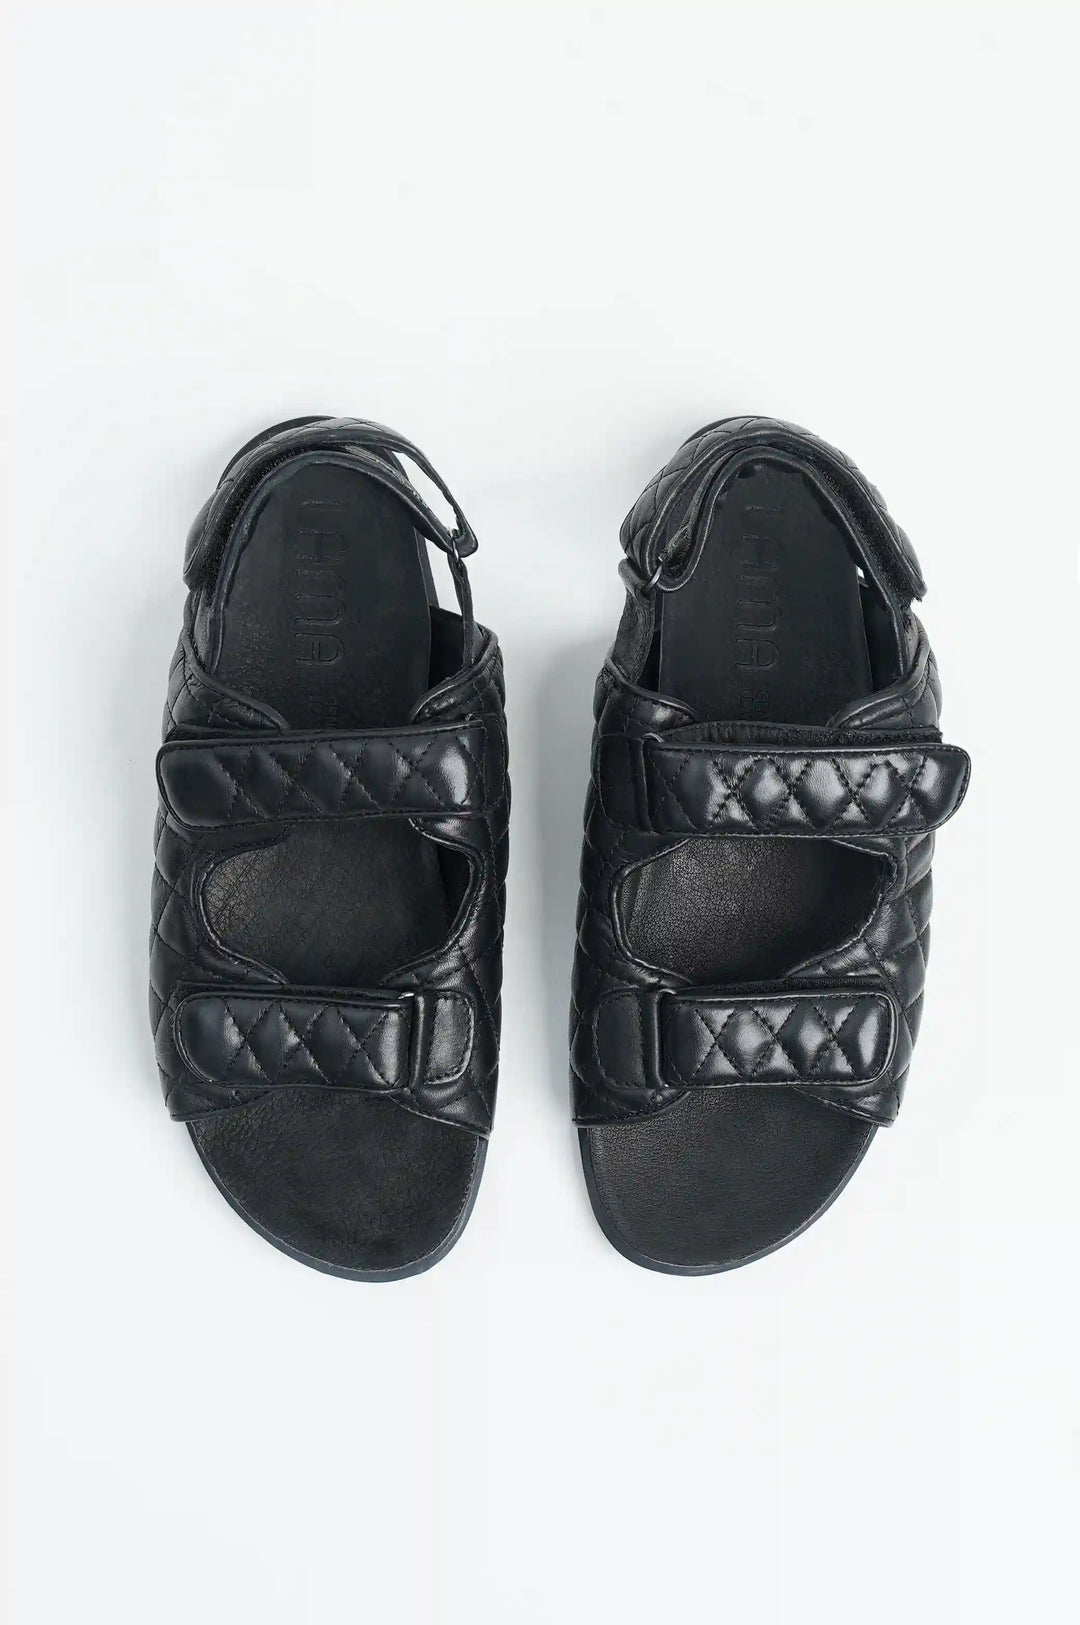 BLACK QUILTED SANDALS